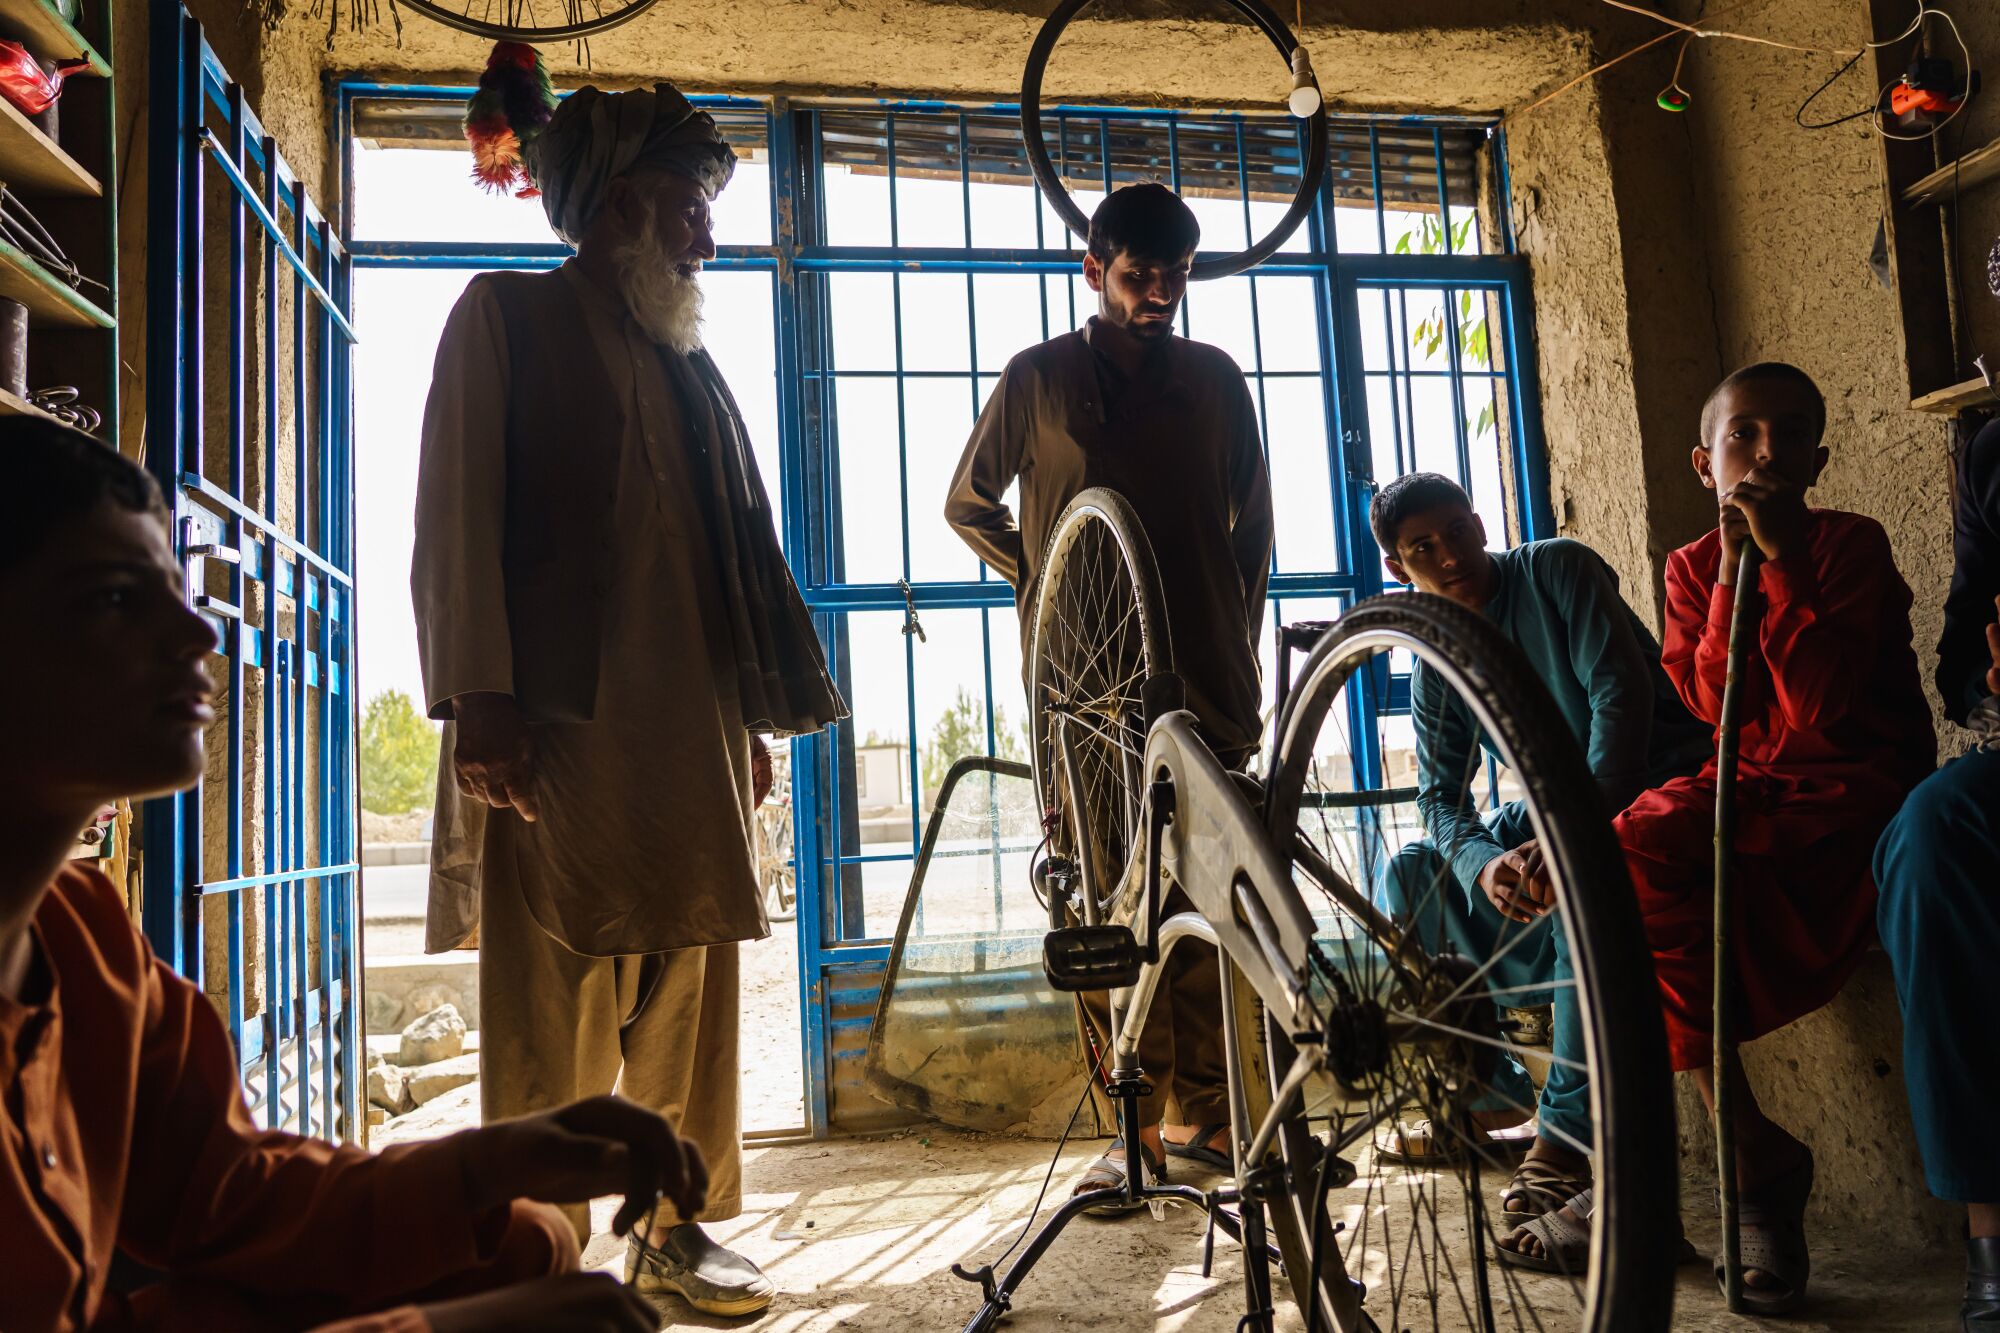 Men sit and stand inside a small shop around an upside-down bicycle.